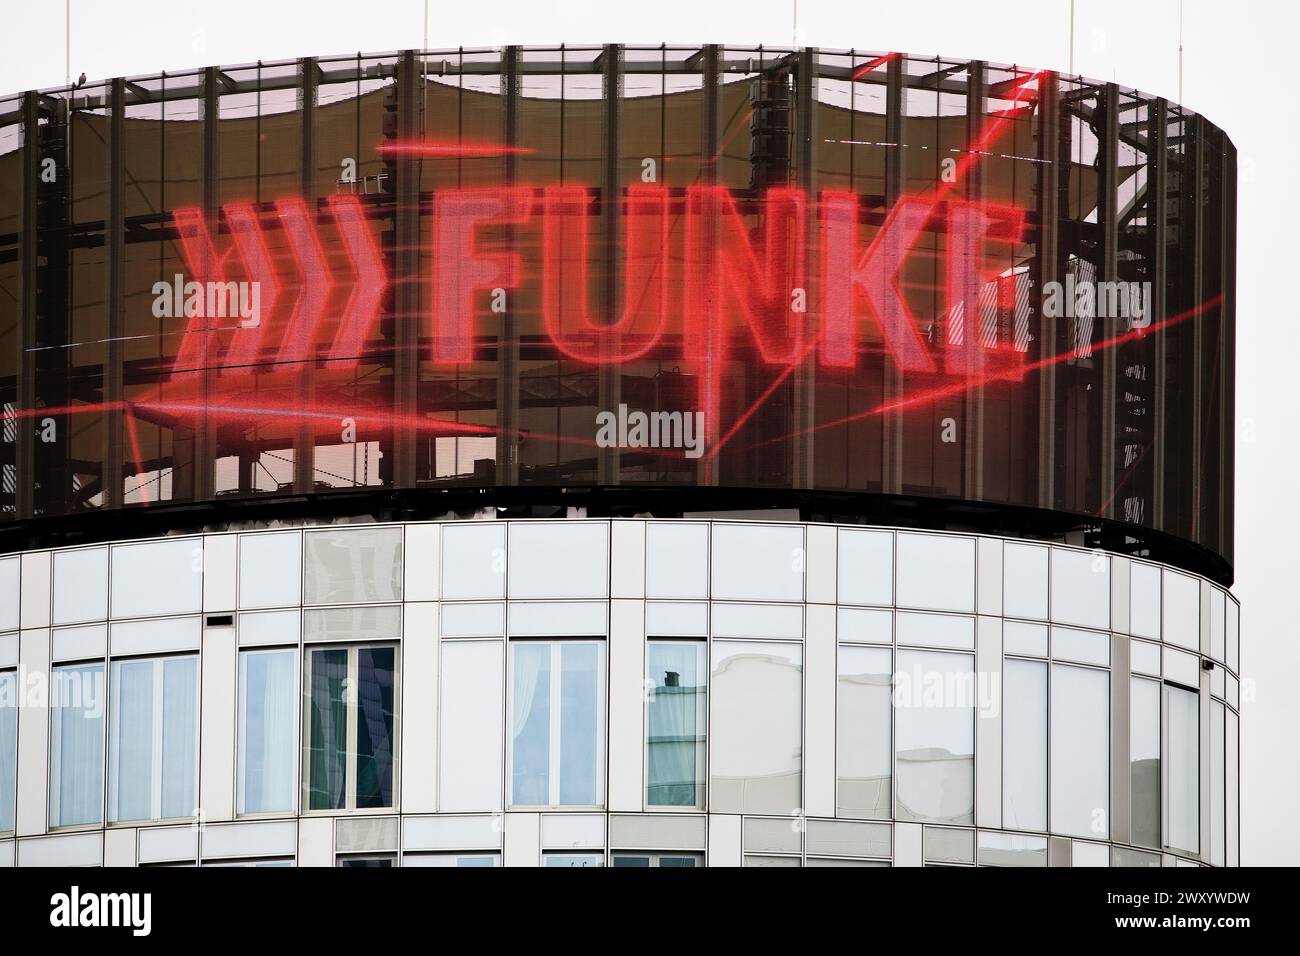 Funke lettering on the Funke Tower with the largest newswall in Germany, Germany, North Rhine-Westphalia, Ruhr Area, Essen Stock Photo